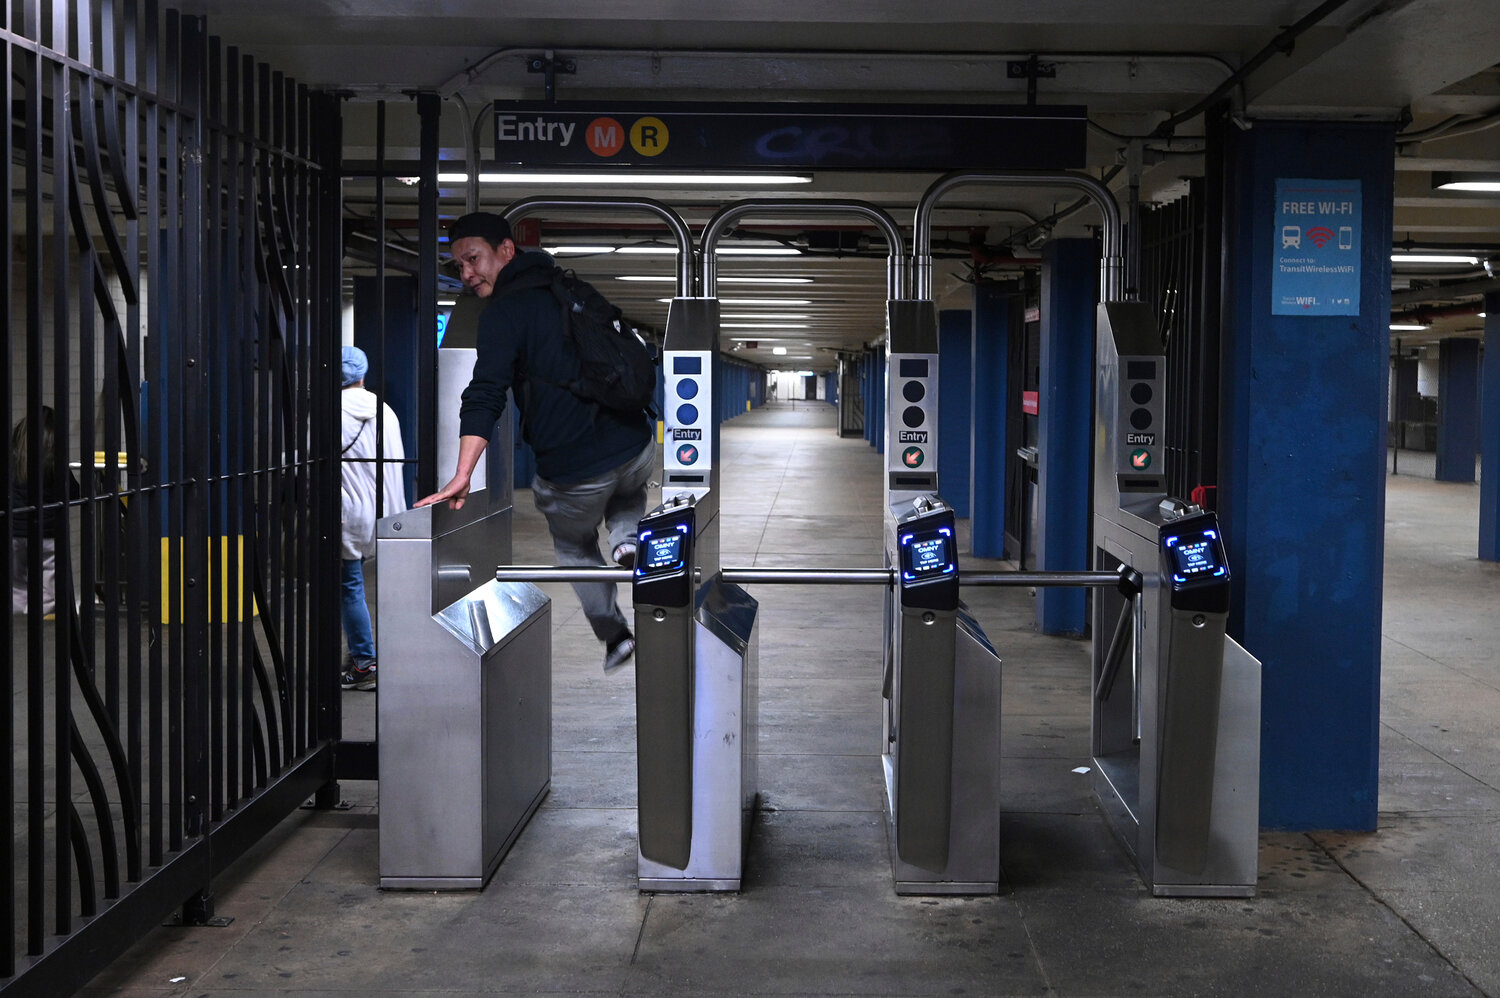 A man hopped over a turnstile in a Queens subway station. Our columnist asks what disincentives are being provided to violators.